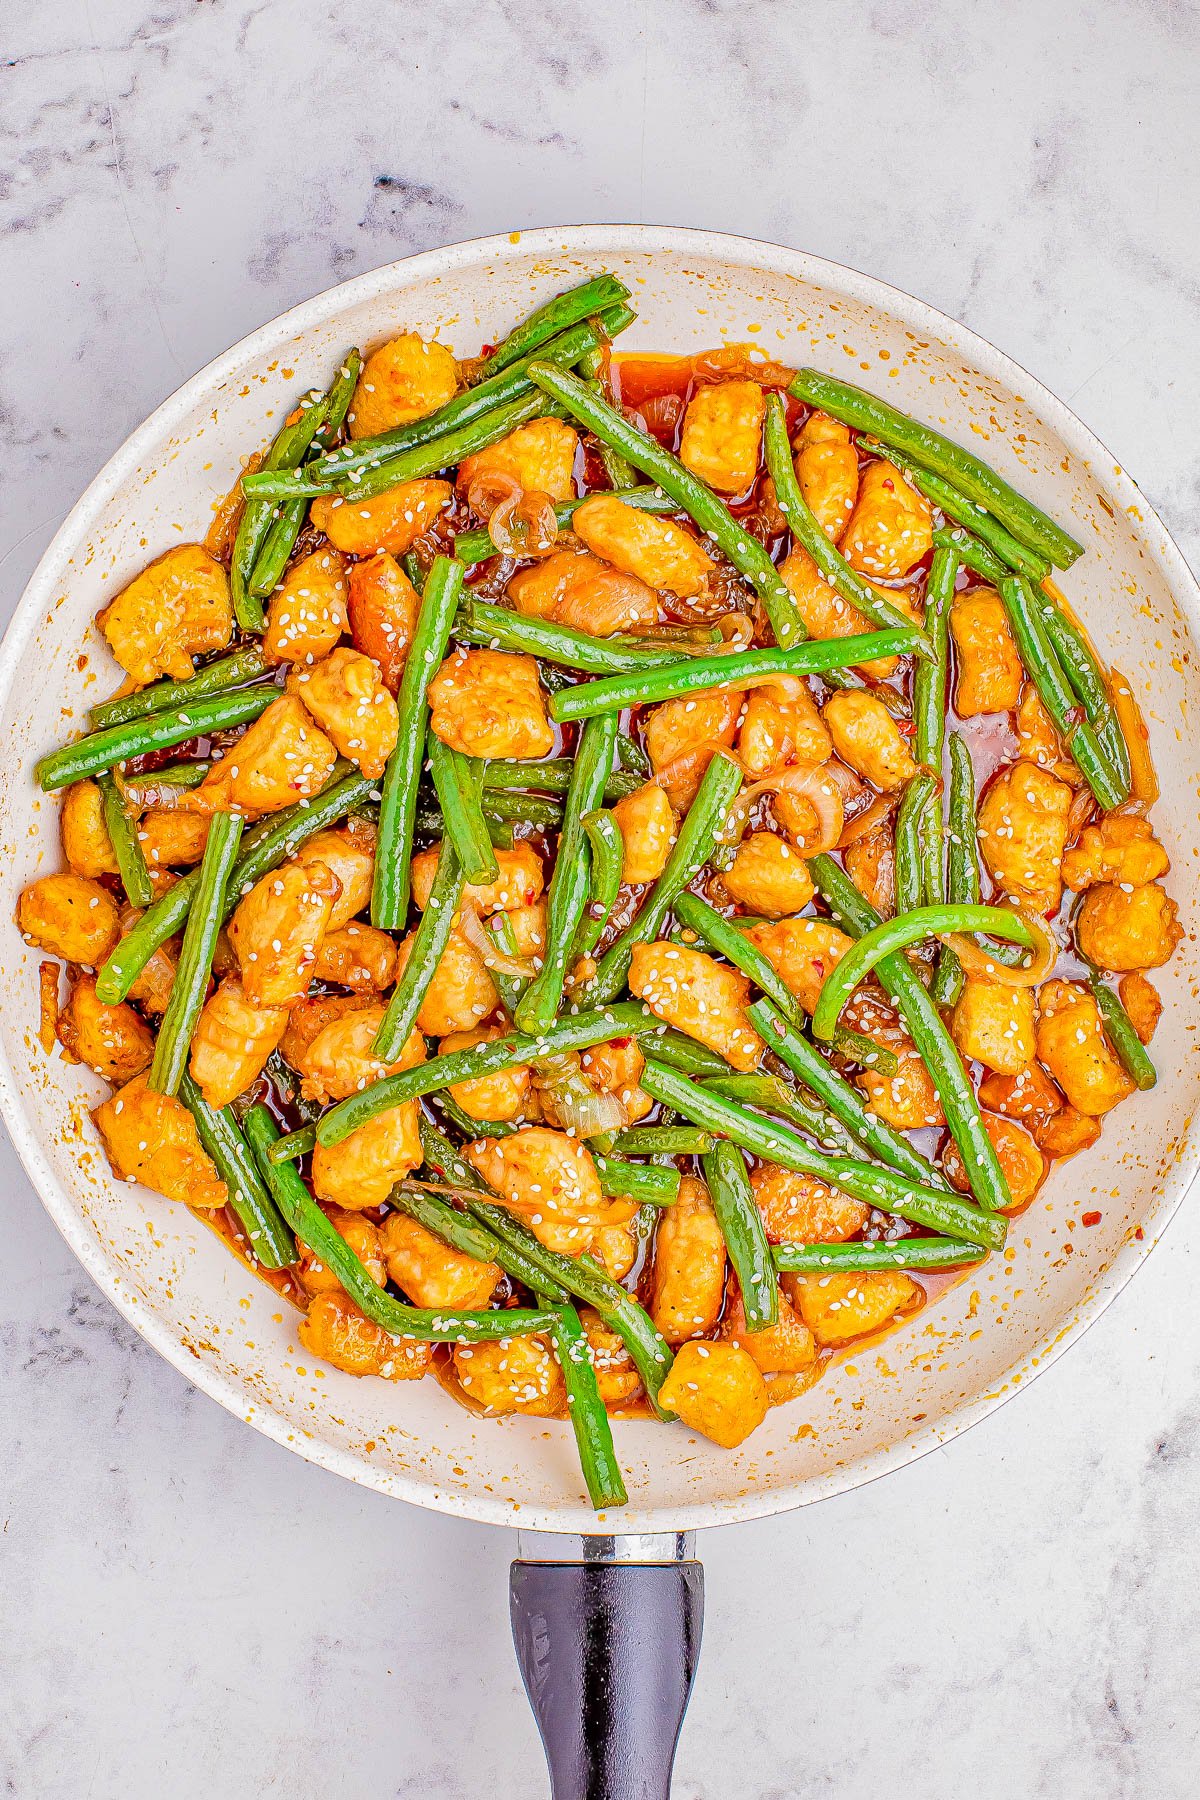 Stir-fried chicken and green beans in a sauce, served in a skillet on a marble surface.